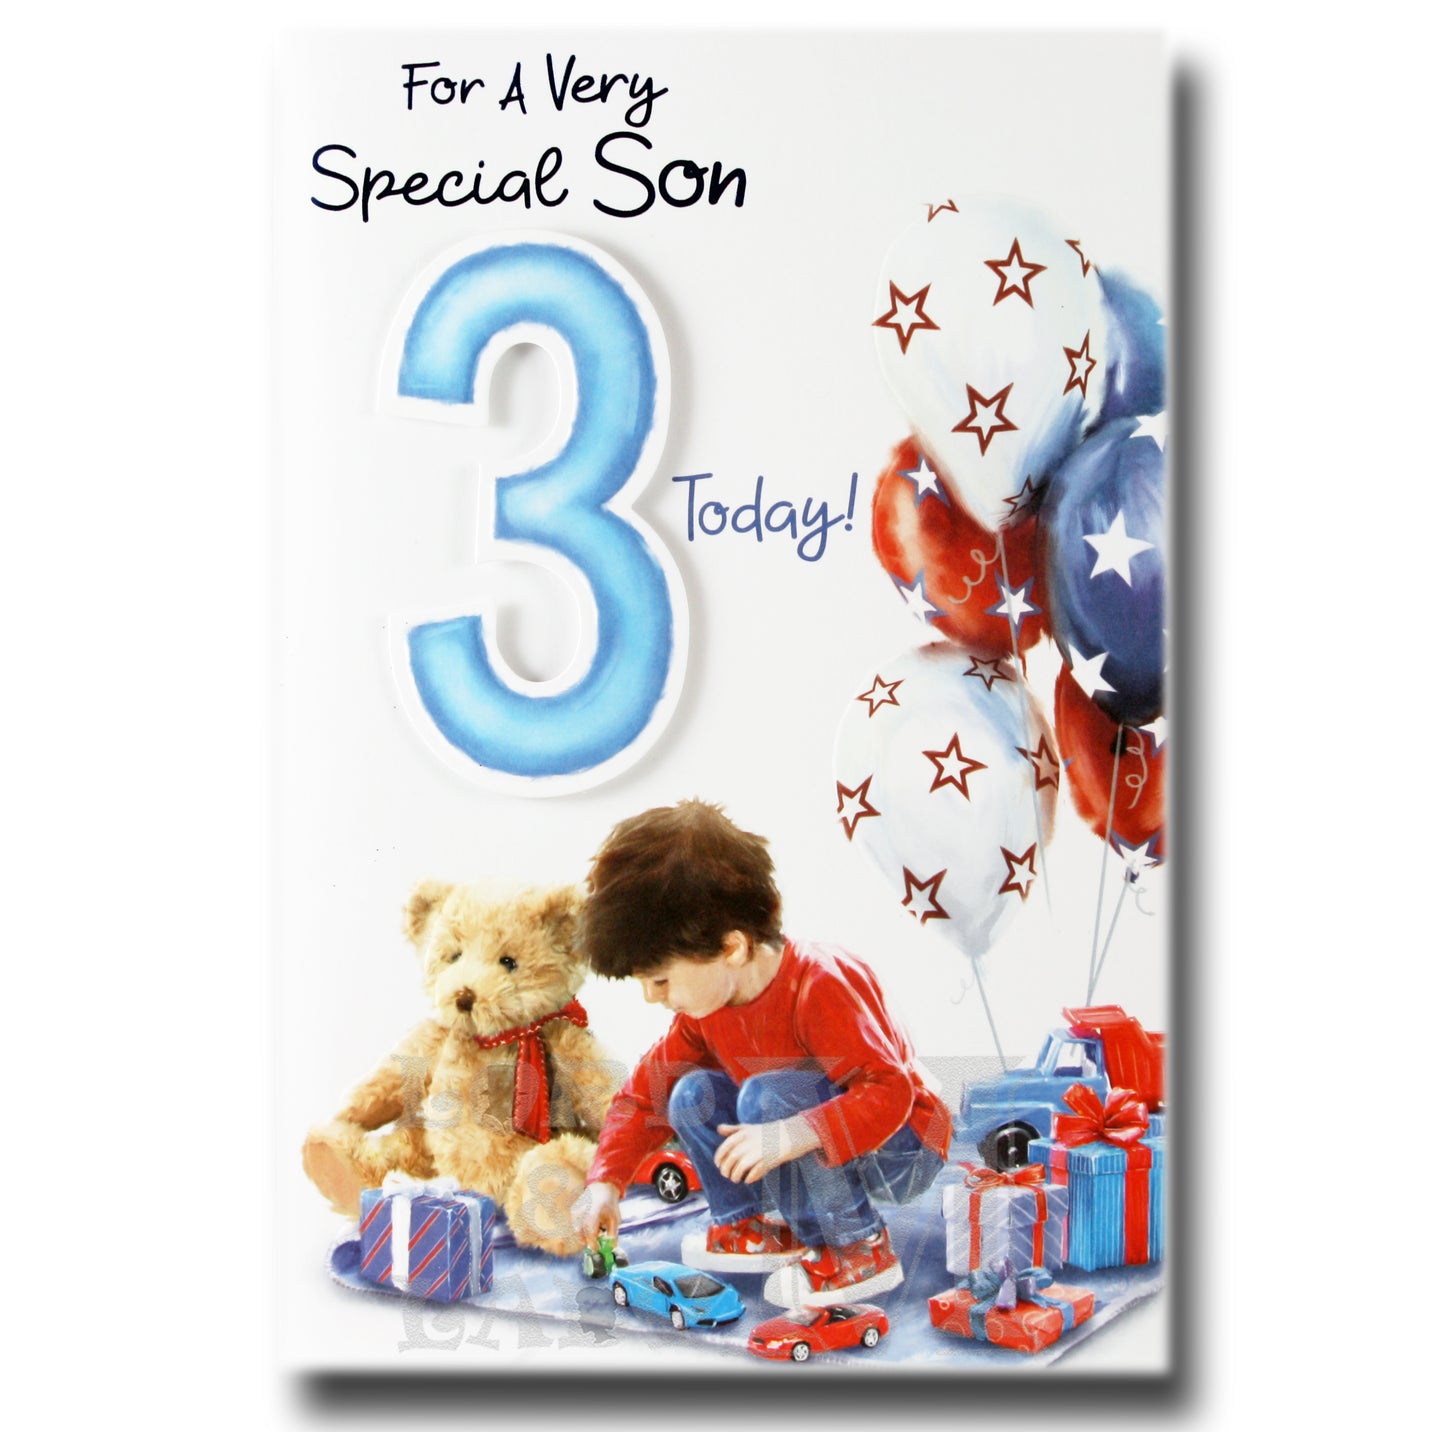 23cm - For A Very Special Son 3 Today! - Cars -BGC